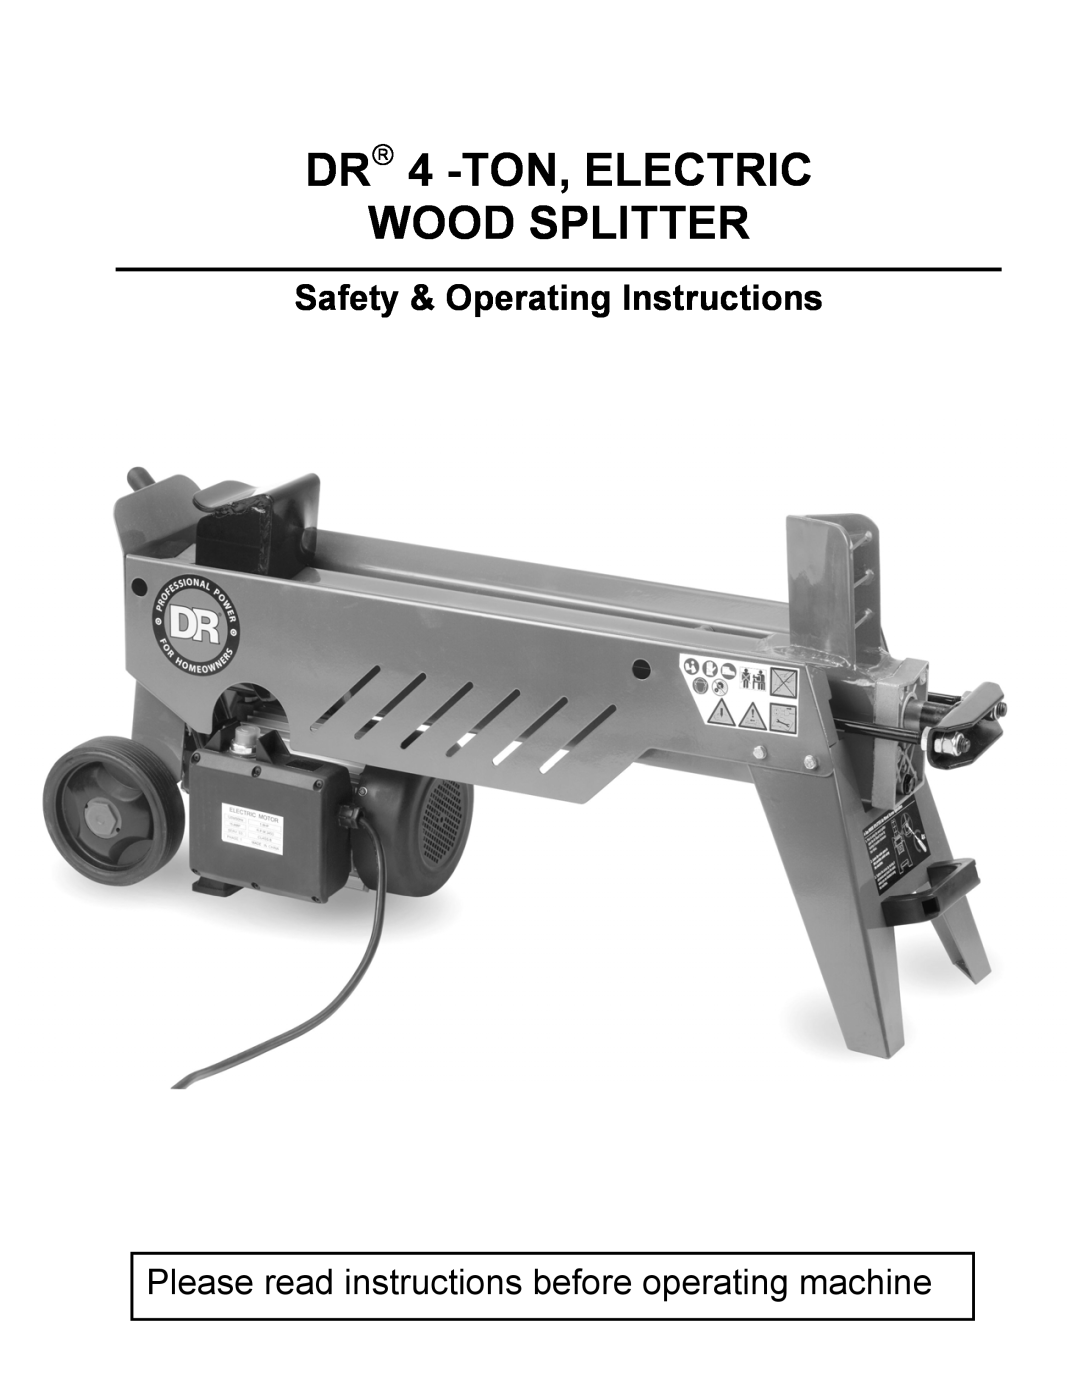 Country Home Products DR 4 -TON manual DR 4 -TON,ELECTRIC WOOD SPLITTER, Safety & Operating Instructions 